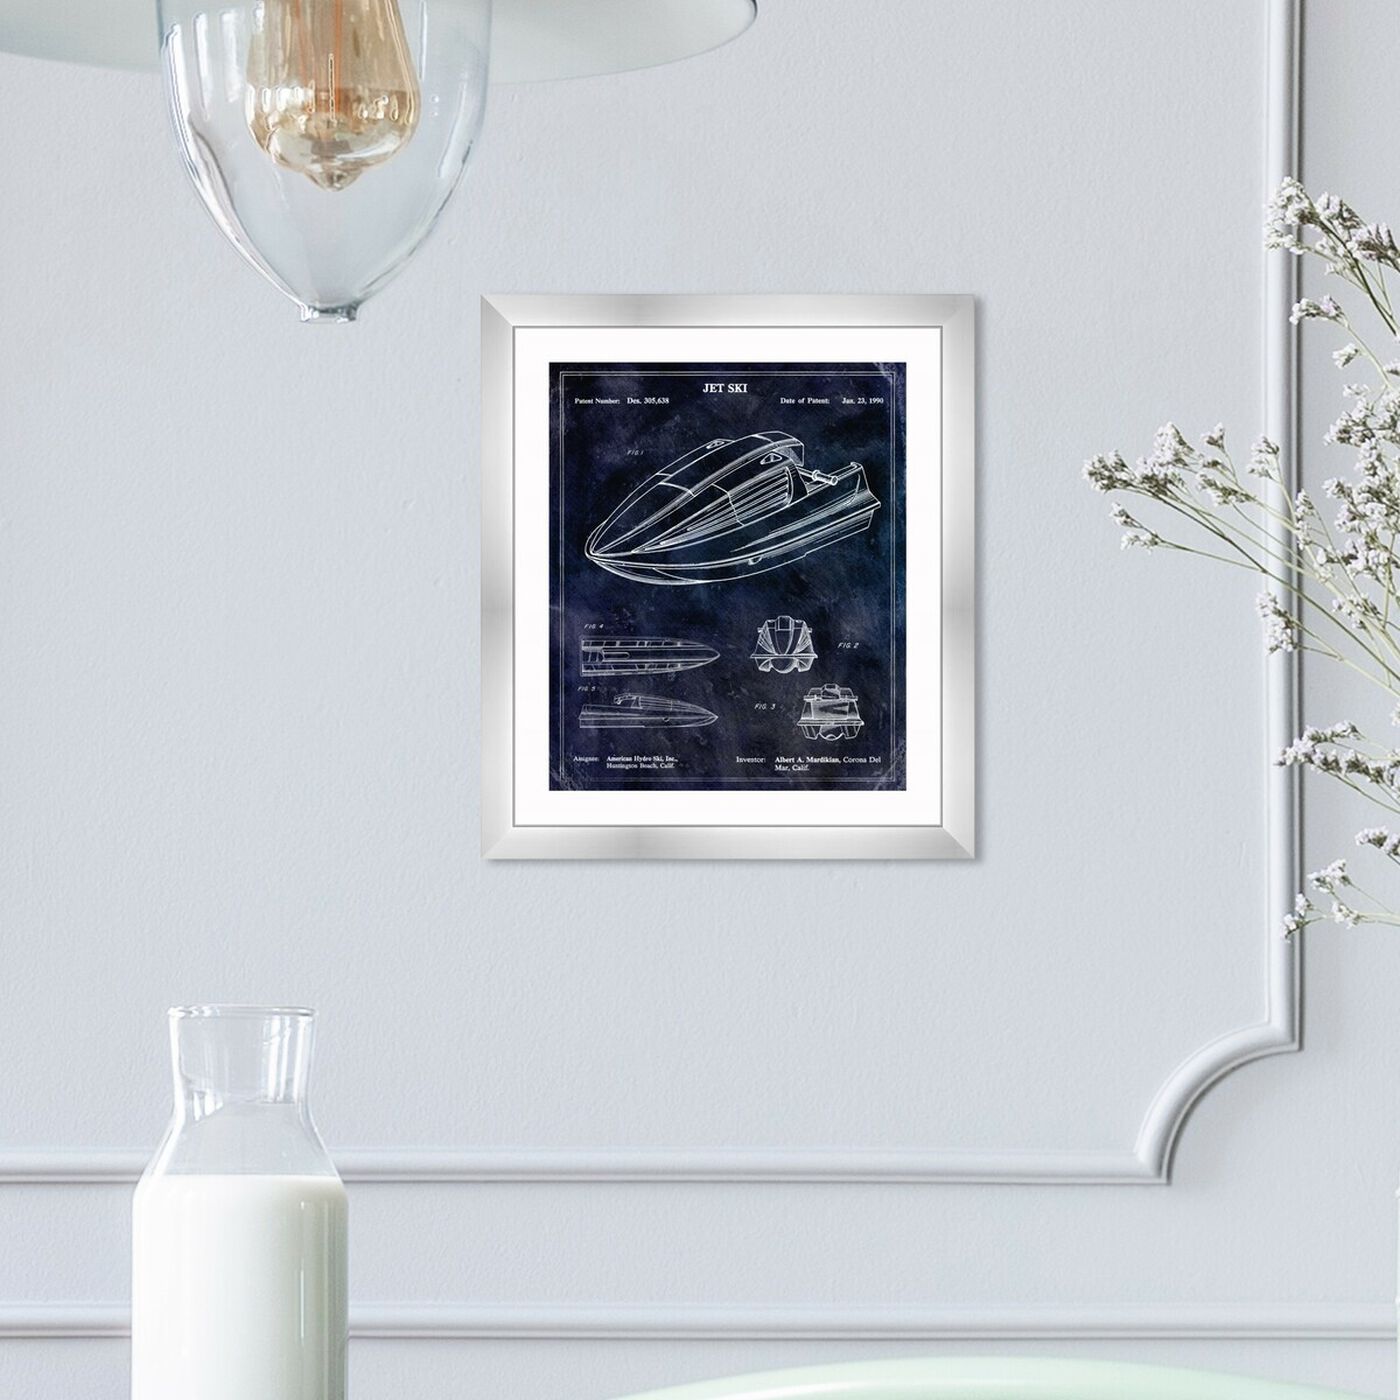 Hanging view of Jet Ski 1990 featuring transportation and military transportation art.